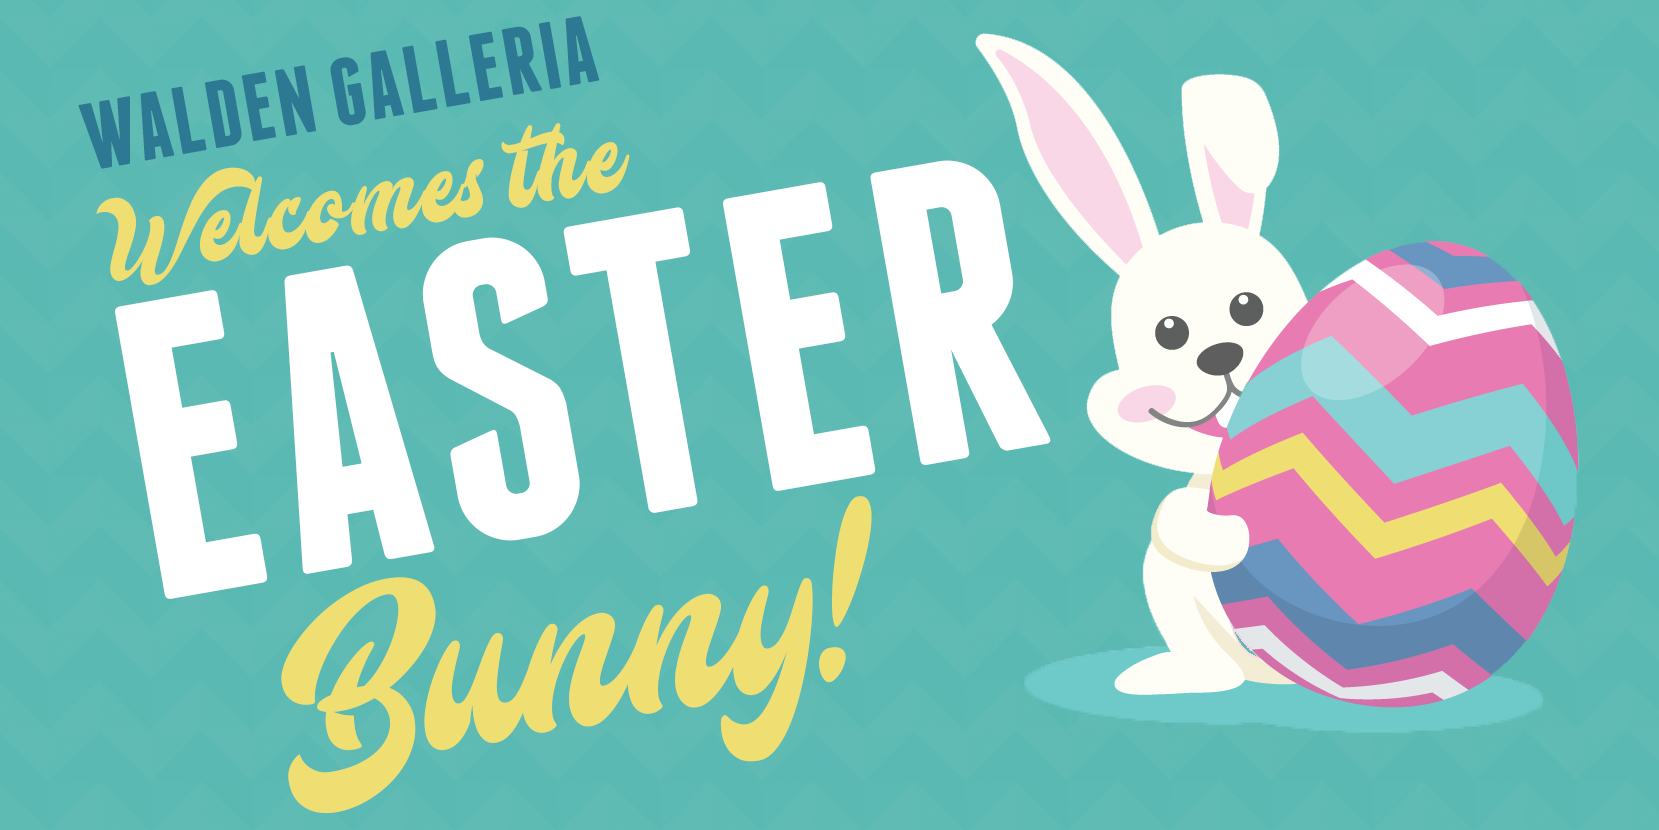 WG Welcomes the Easter Bunny 2018_Blog Post Image